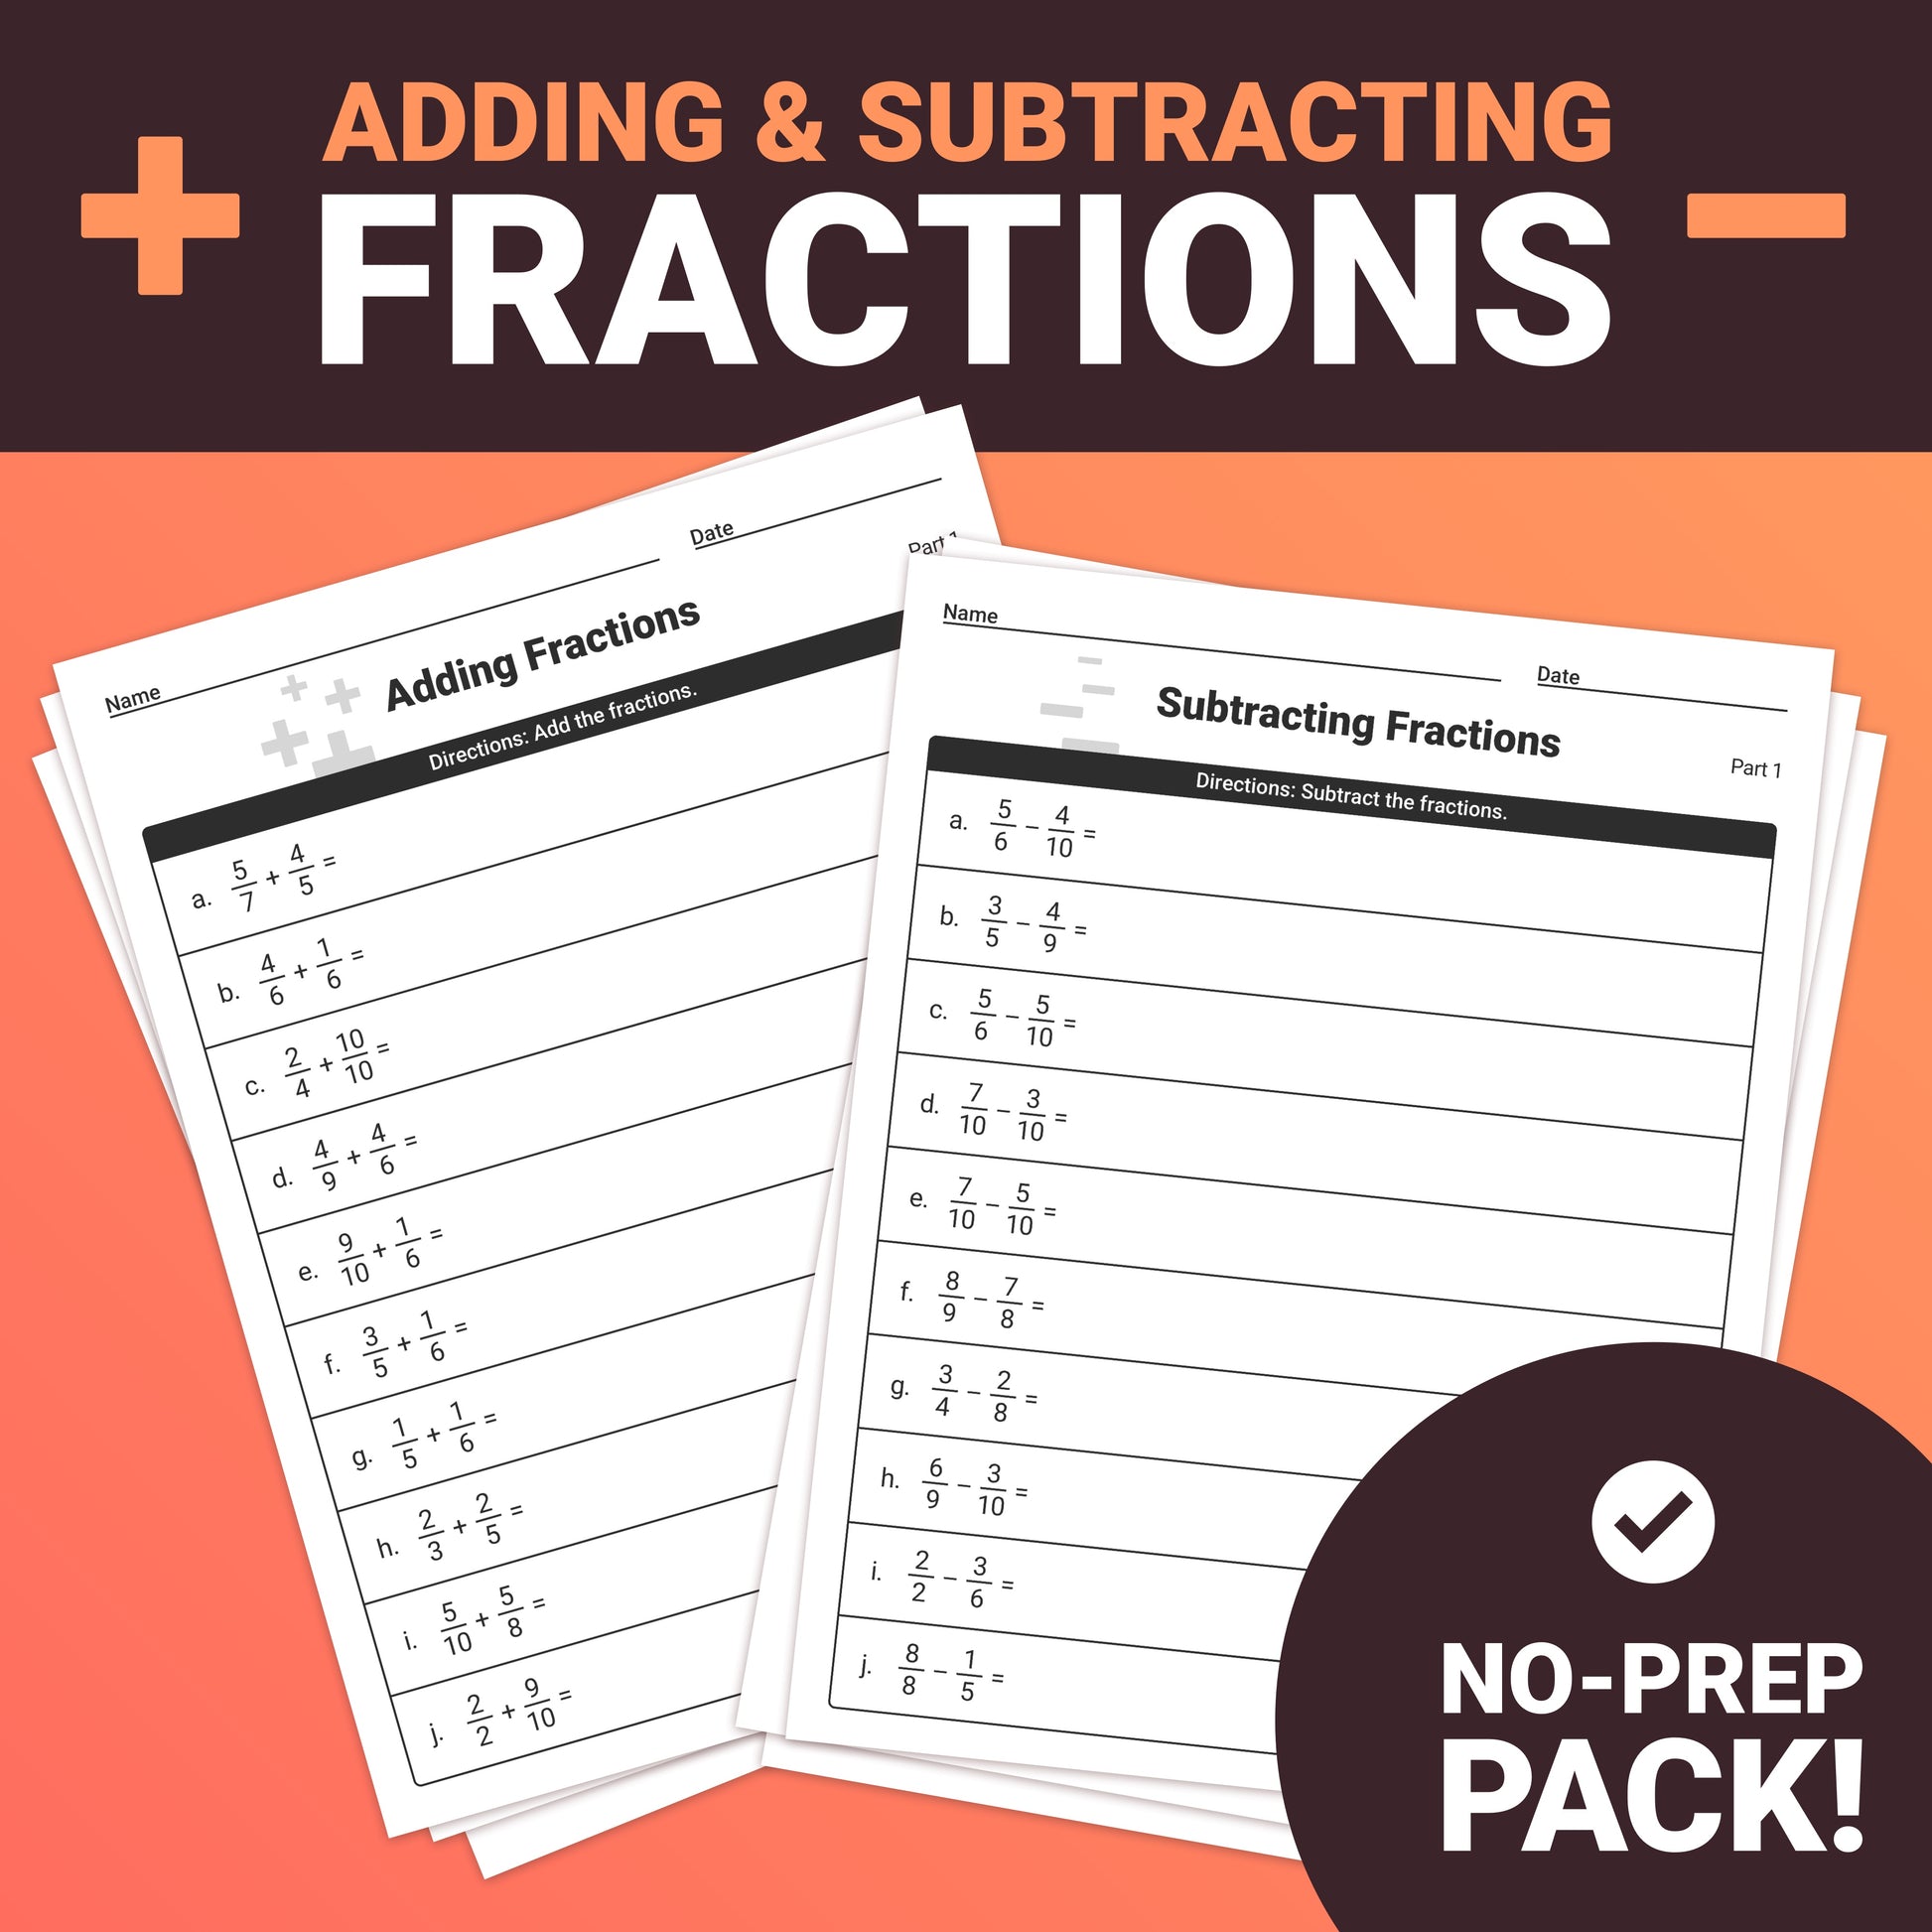 Adding & subtracting fractions printable assessments